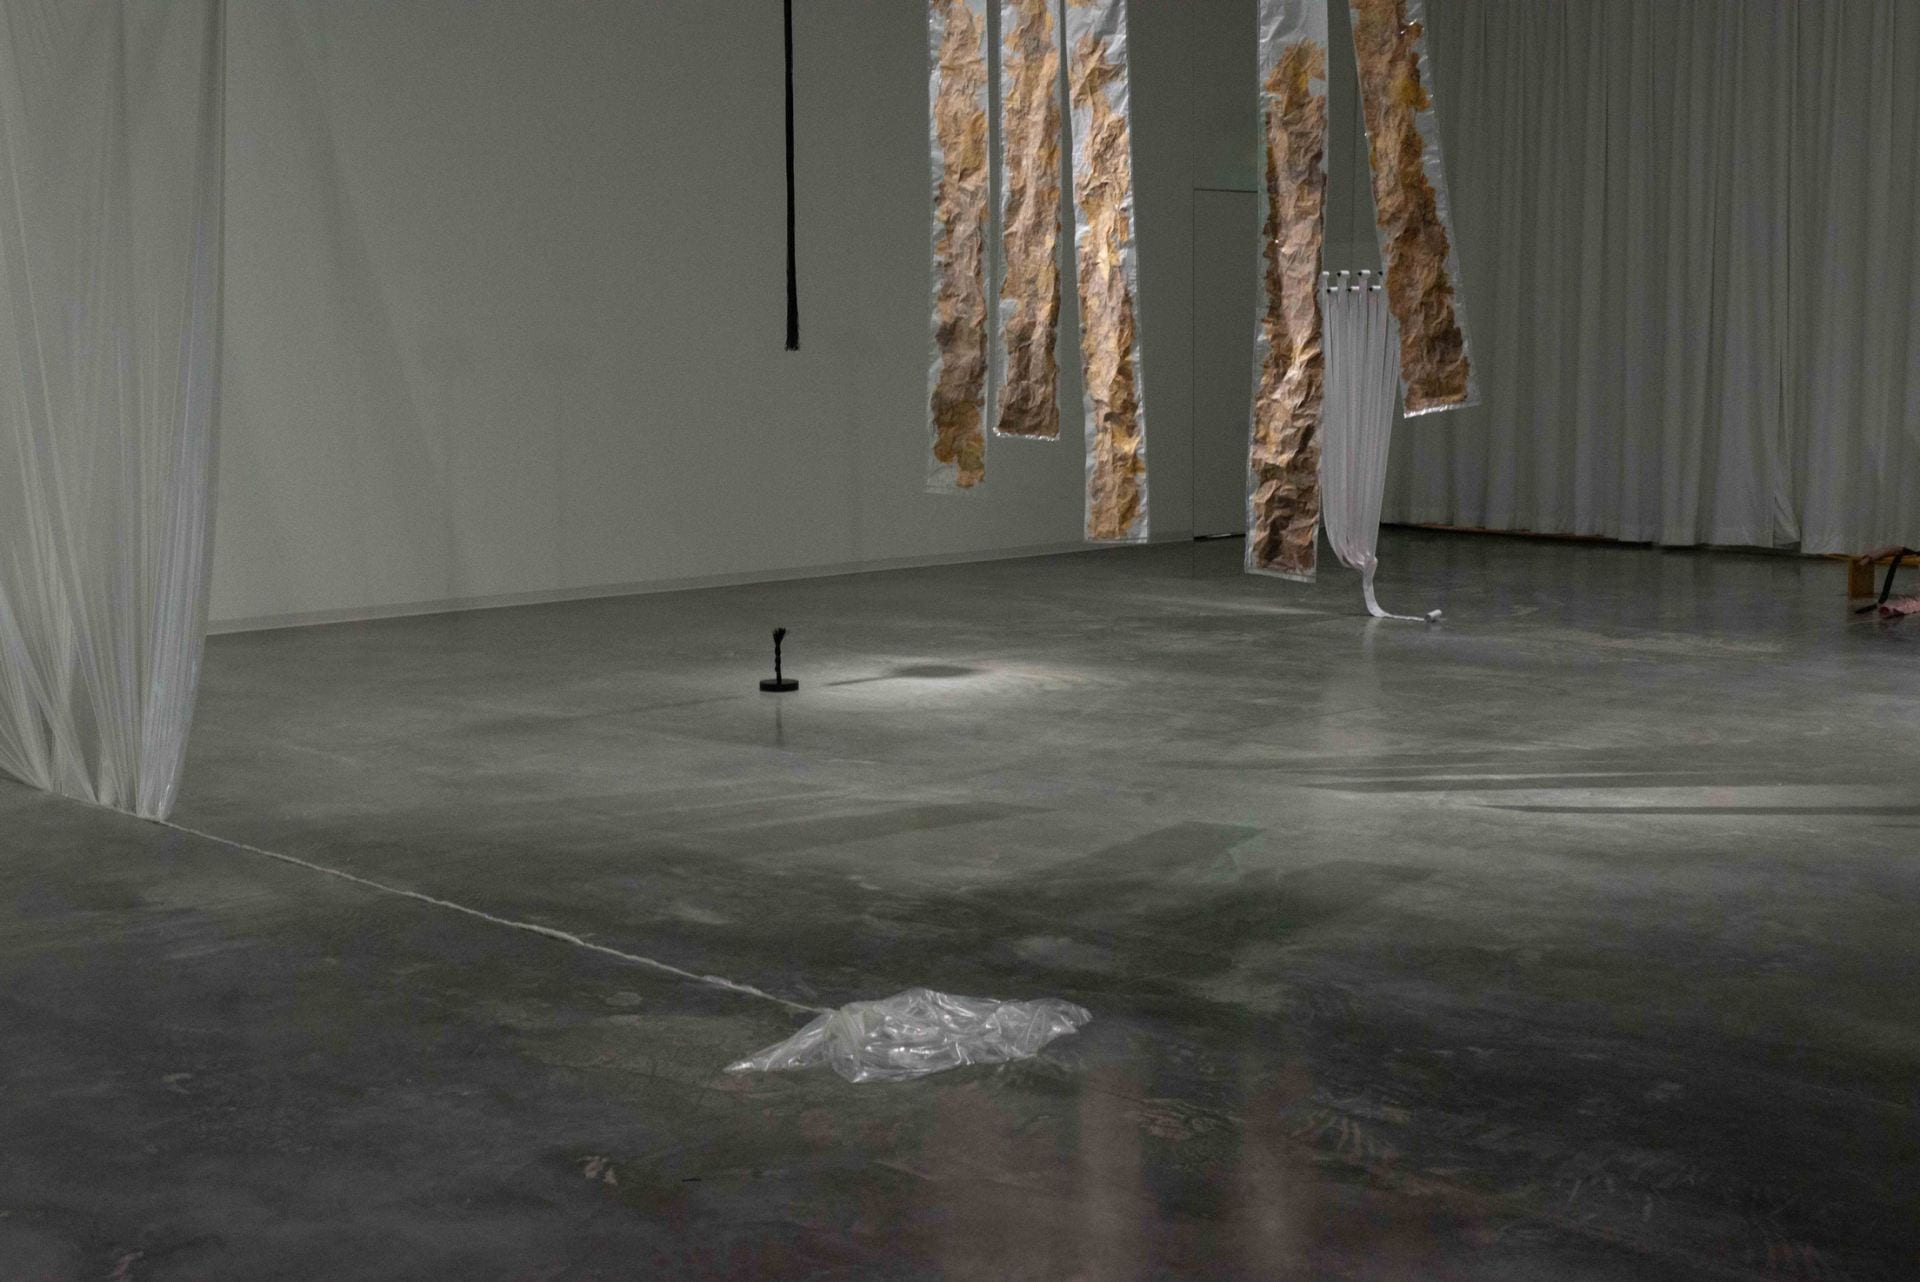 Image shows a sculptural installation in gallery space with various hanging plastic, rope, and leaves encased in plastic